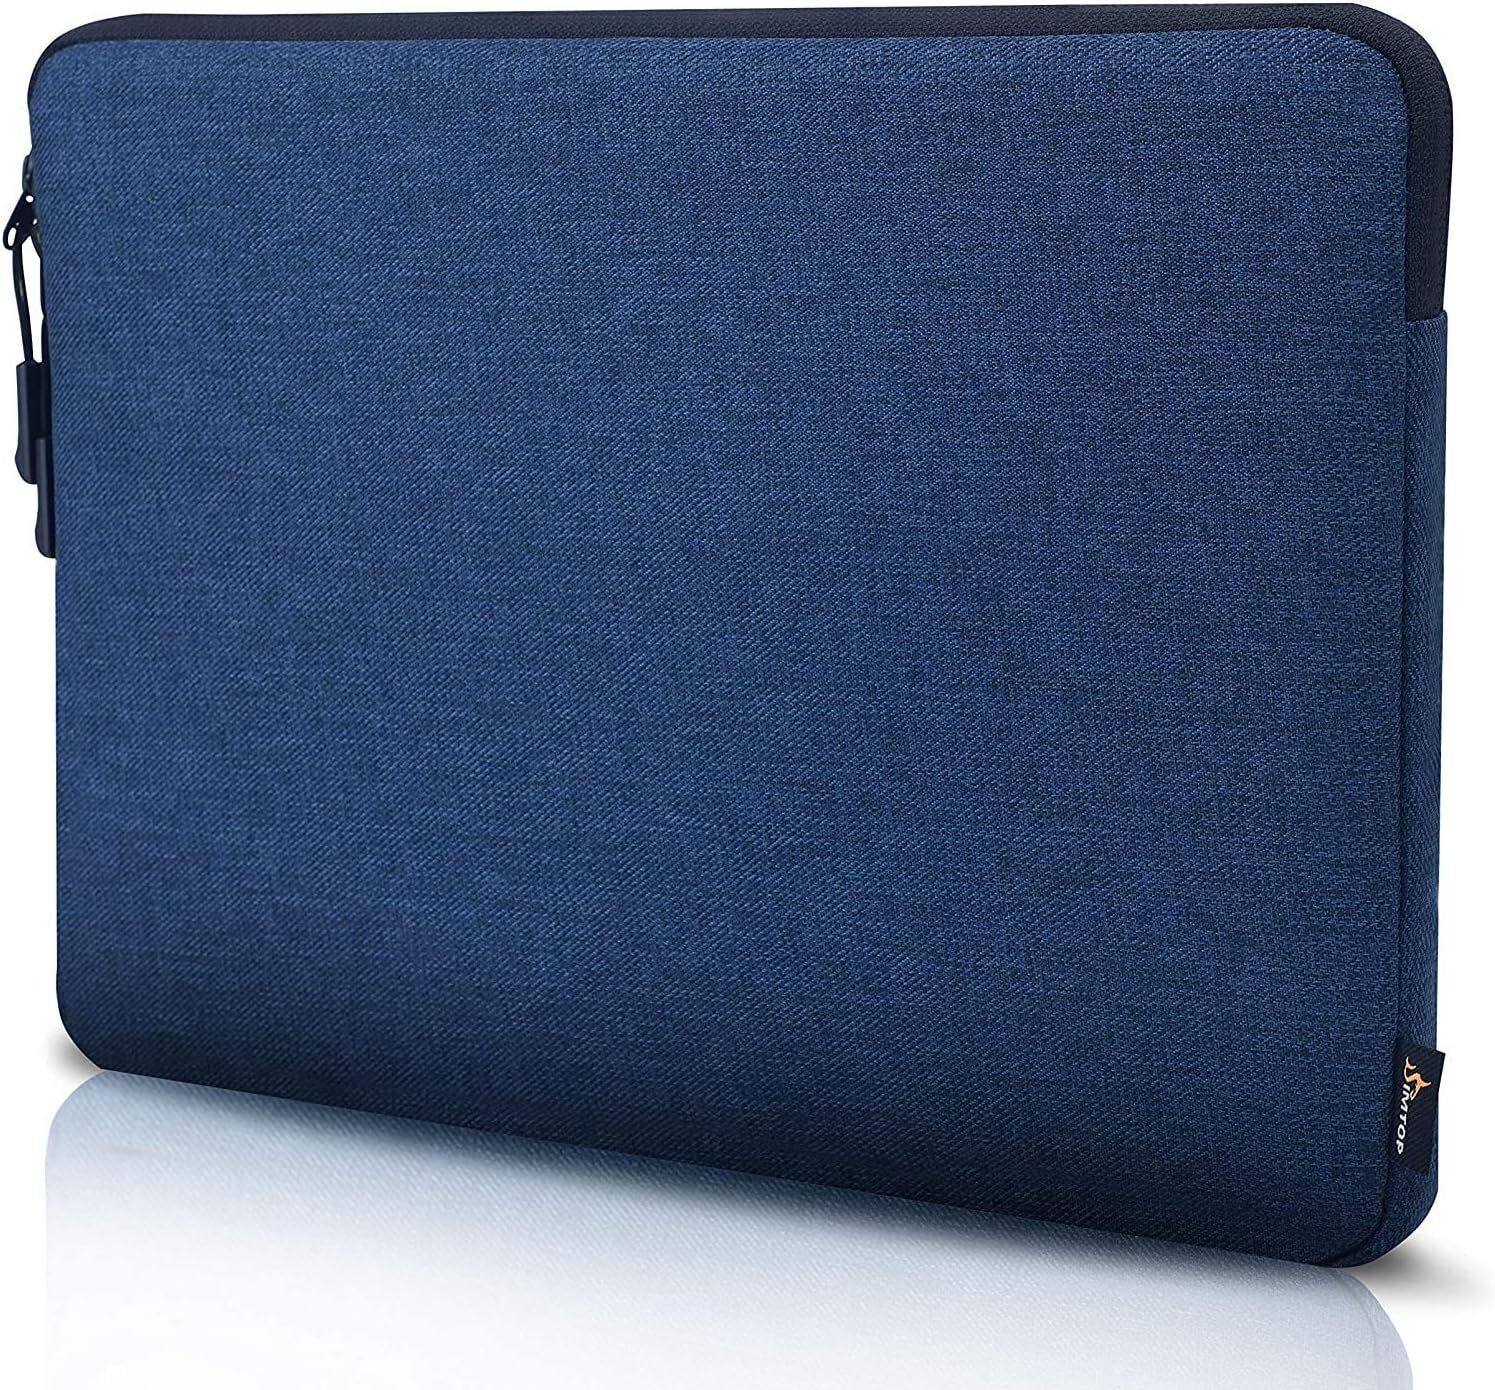 360° Protection for Your 13.3 15 Inch MacBook Air or Notebook- SIMTOP Laptop Bag